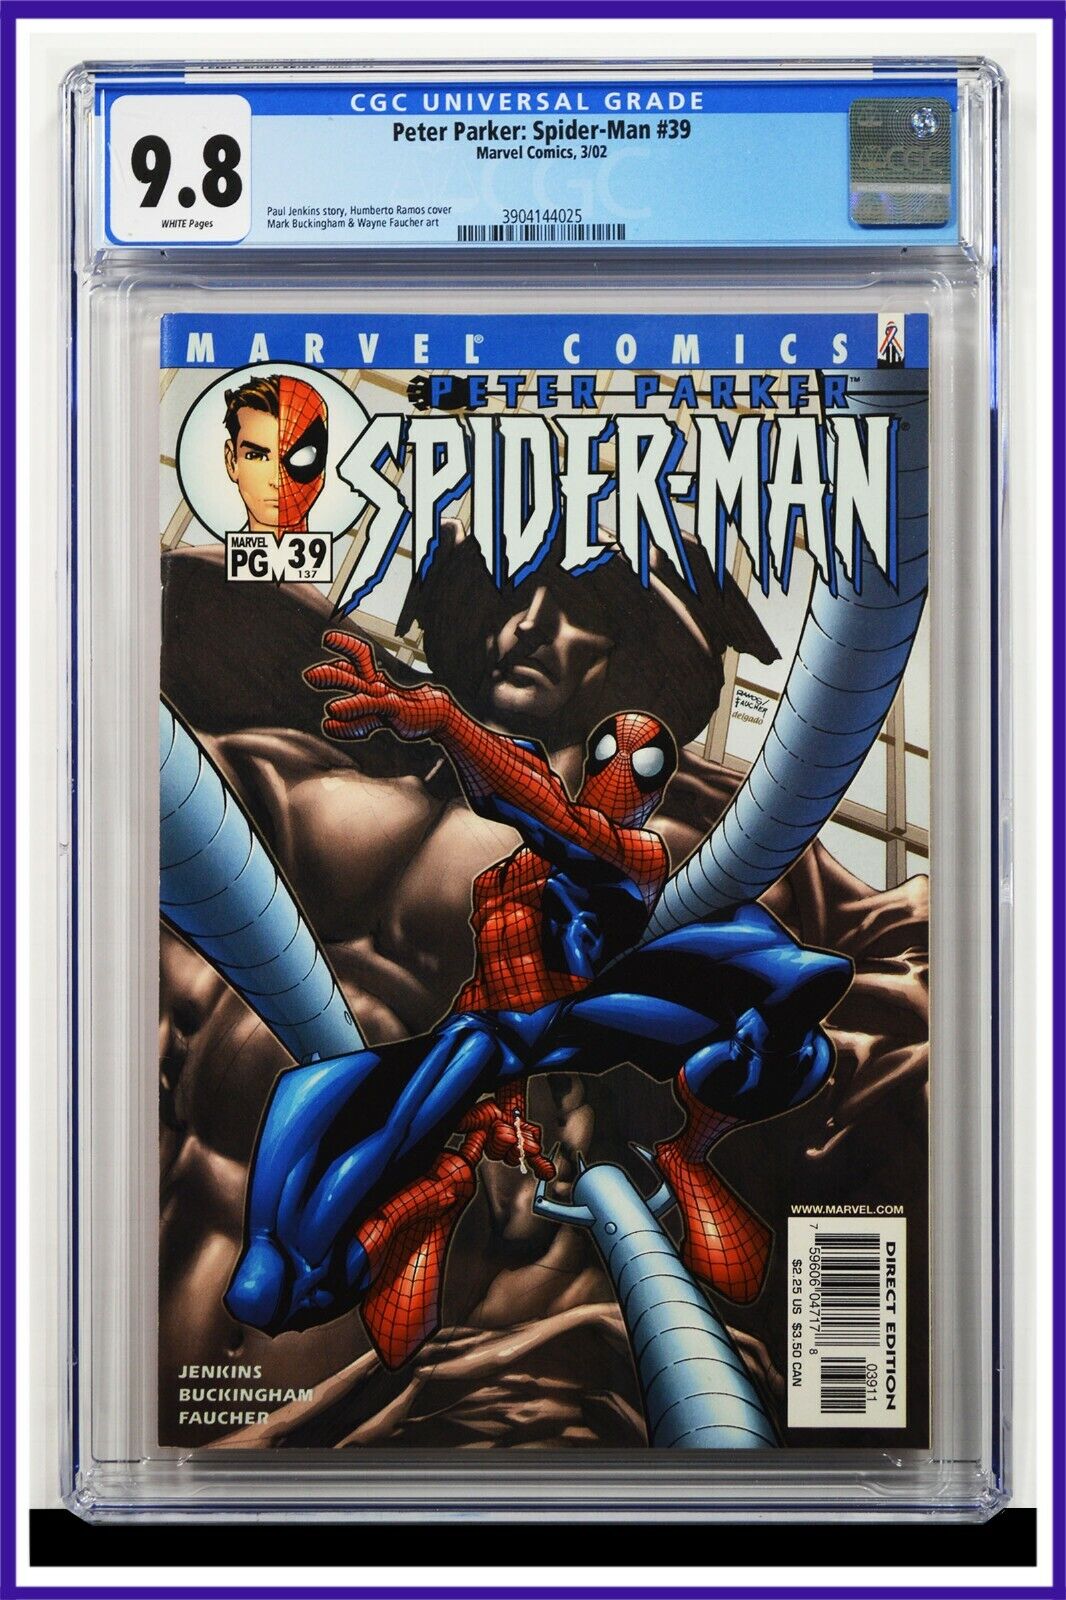 Peter Parker Spider-Man #39 CGC Graded 9.8 Marvel 2002 White Pages Comic Book.